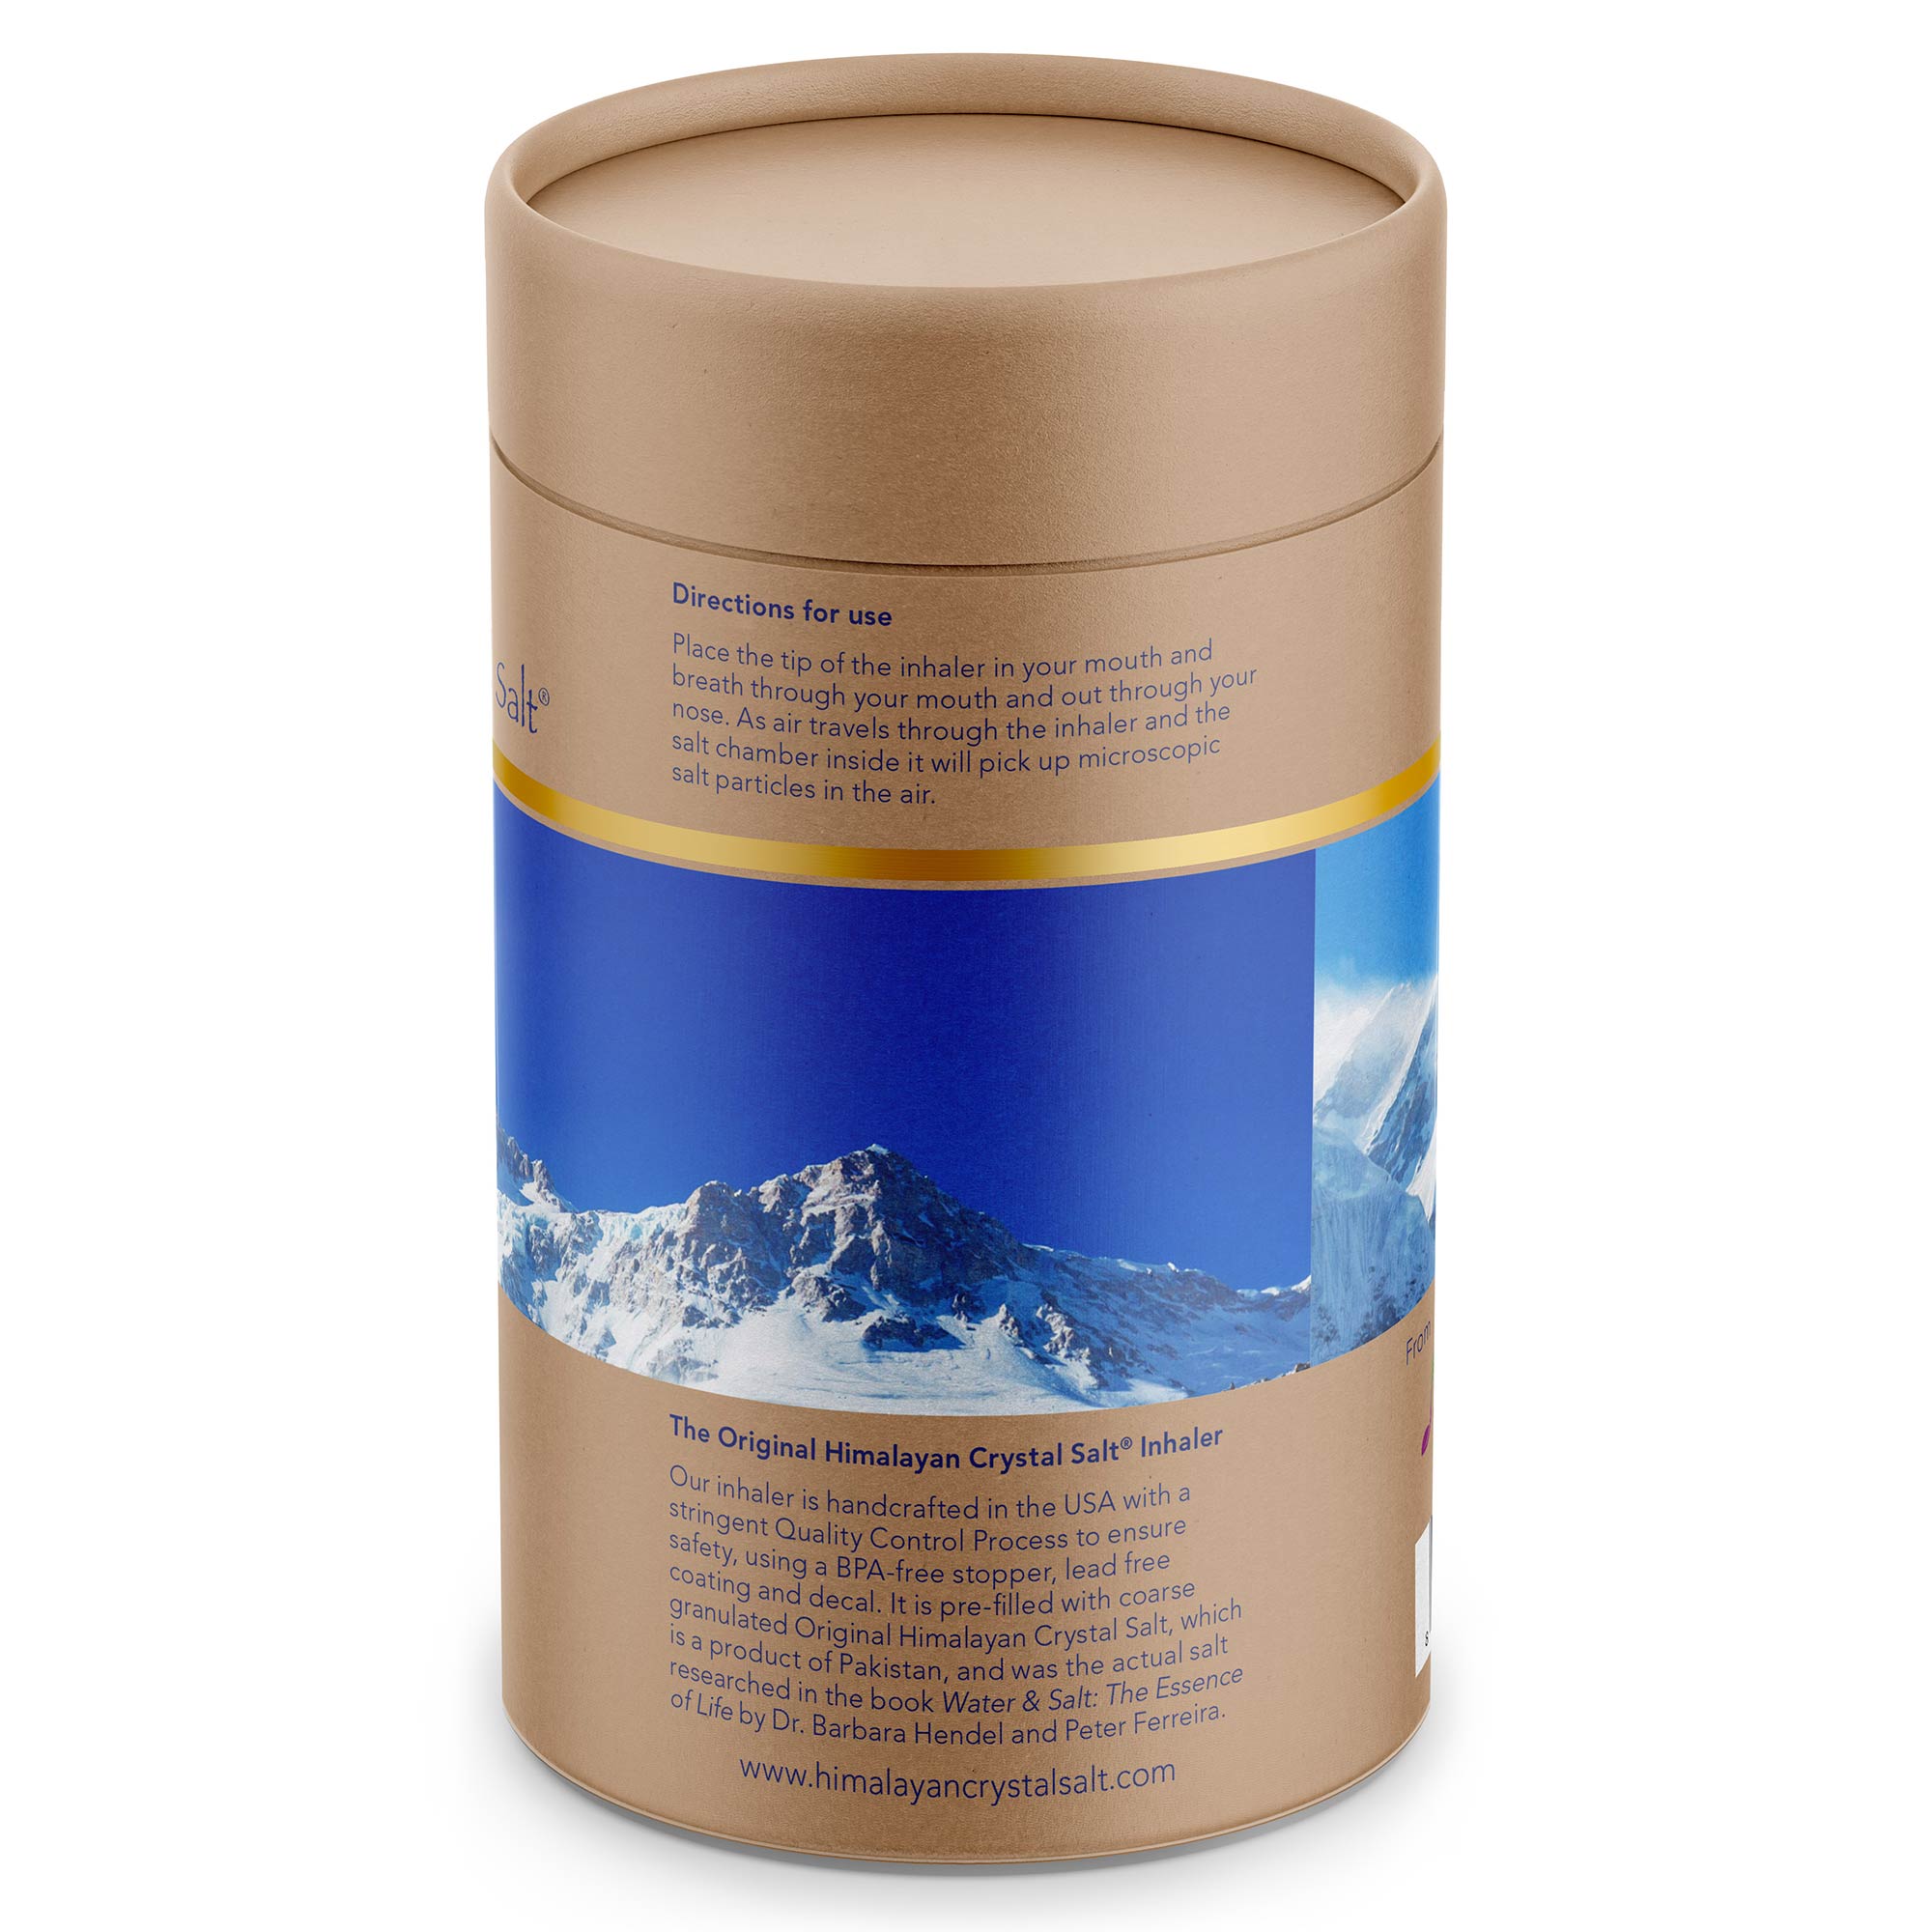 Inhaler + Neti Pot back of product box, tan cylindrical shape with gold band and snow-capped mountains and blue sky, with white background